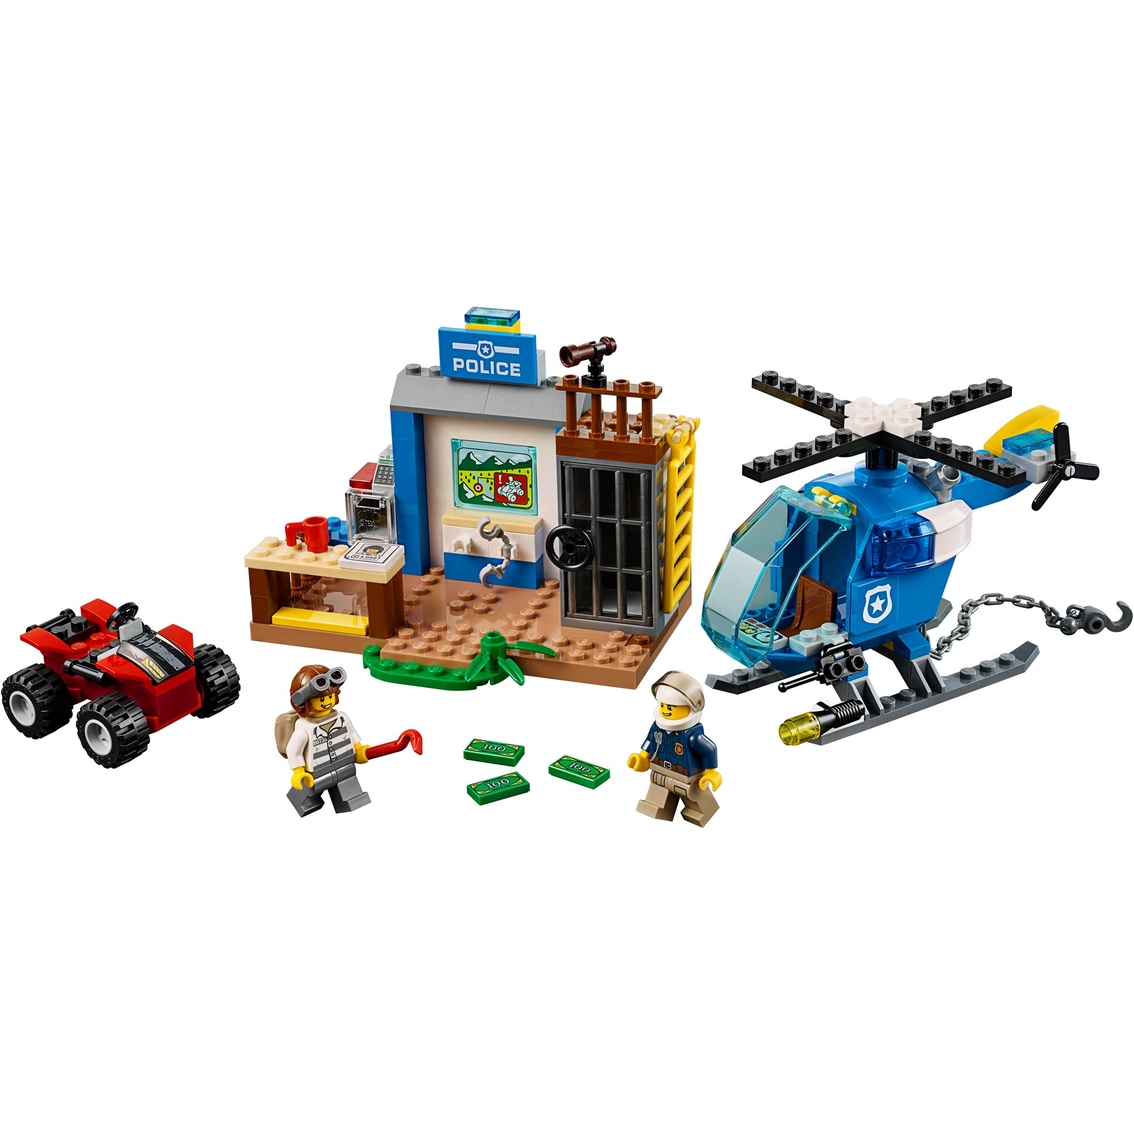 LEGO Juniors Mountain Police Chase - Image 2 of 2